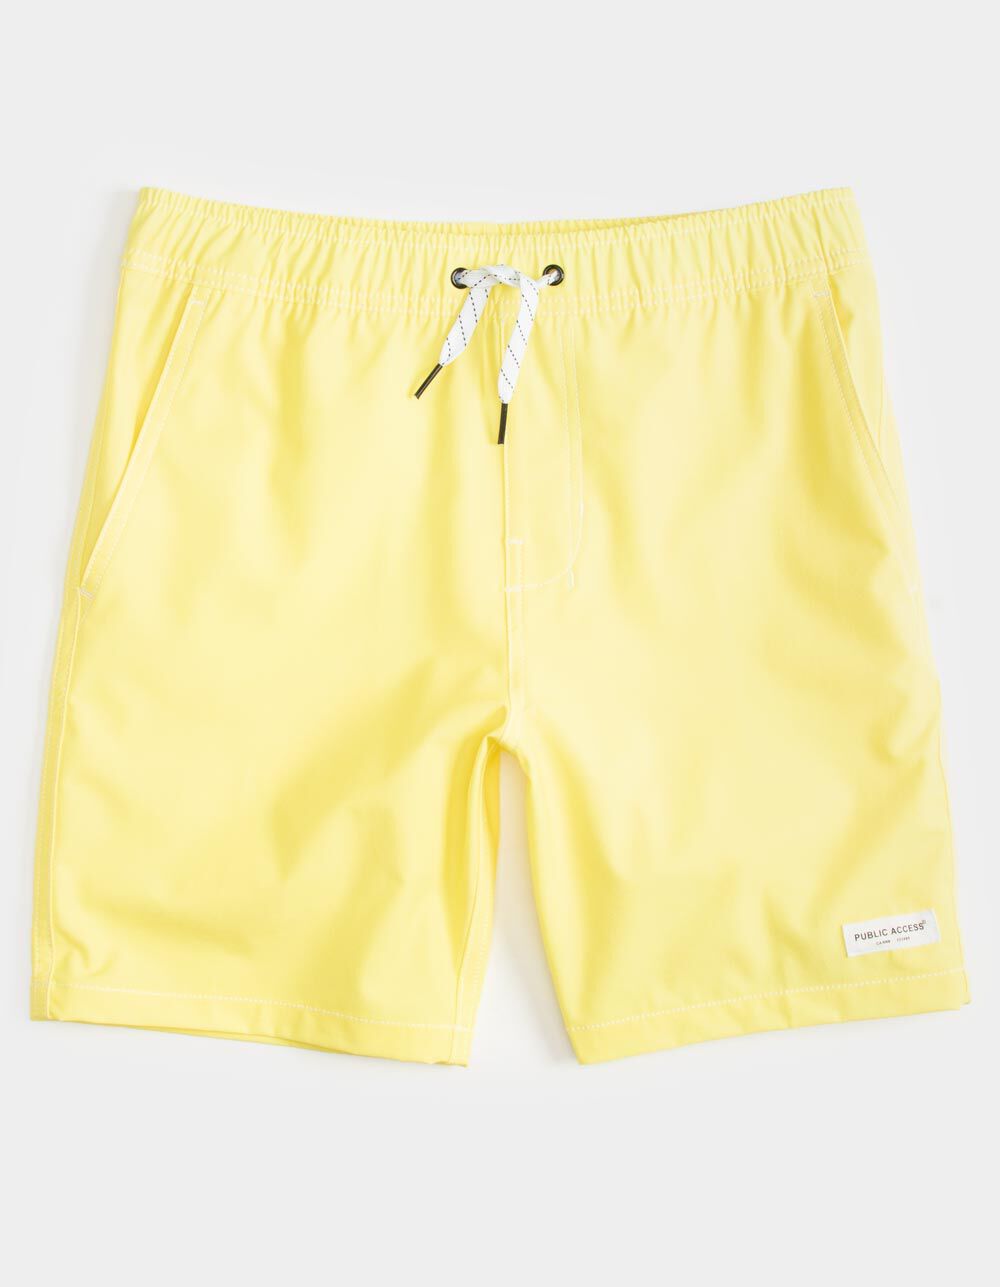 PUBLIC ACCESS Vintage Walker Boys Yellow Combo Volley Shorts - YELLOW ...